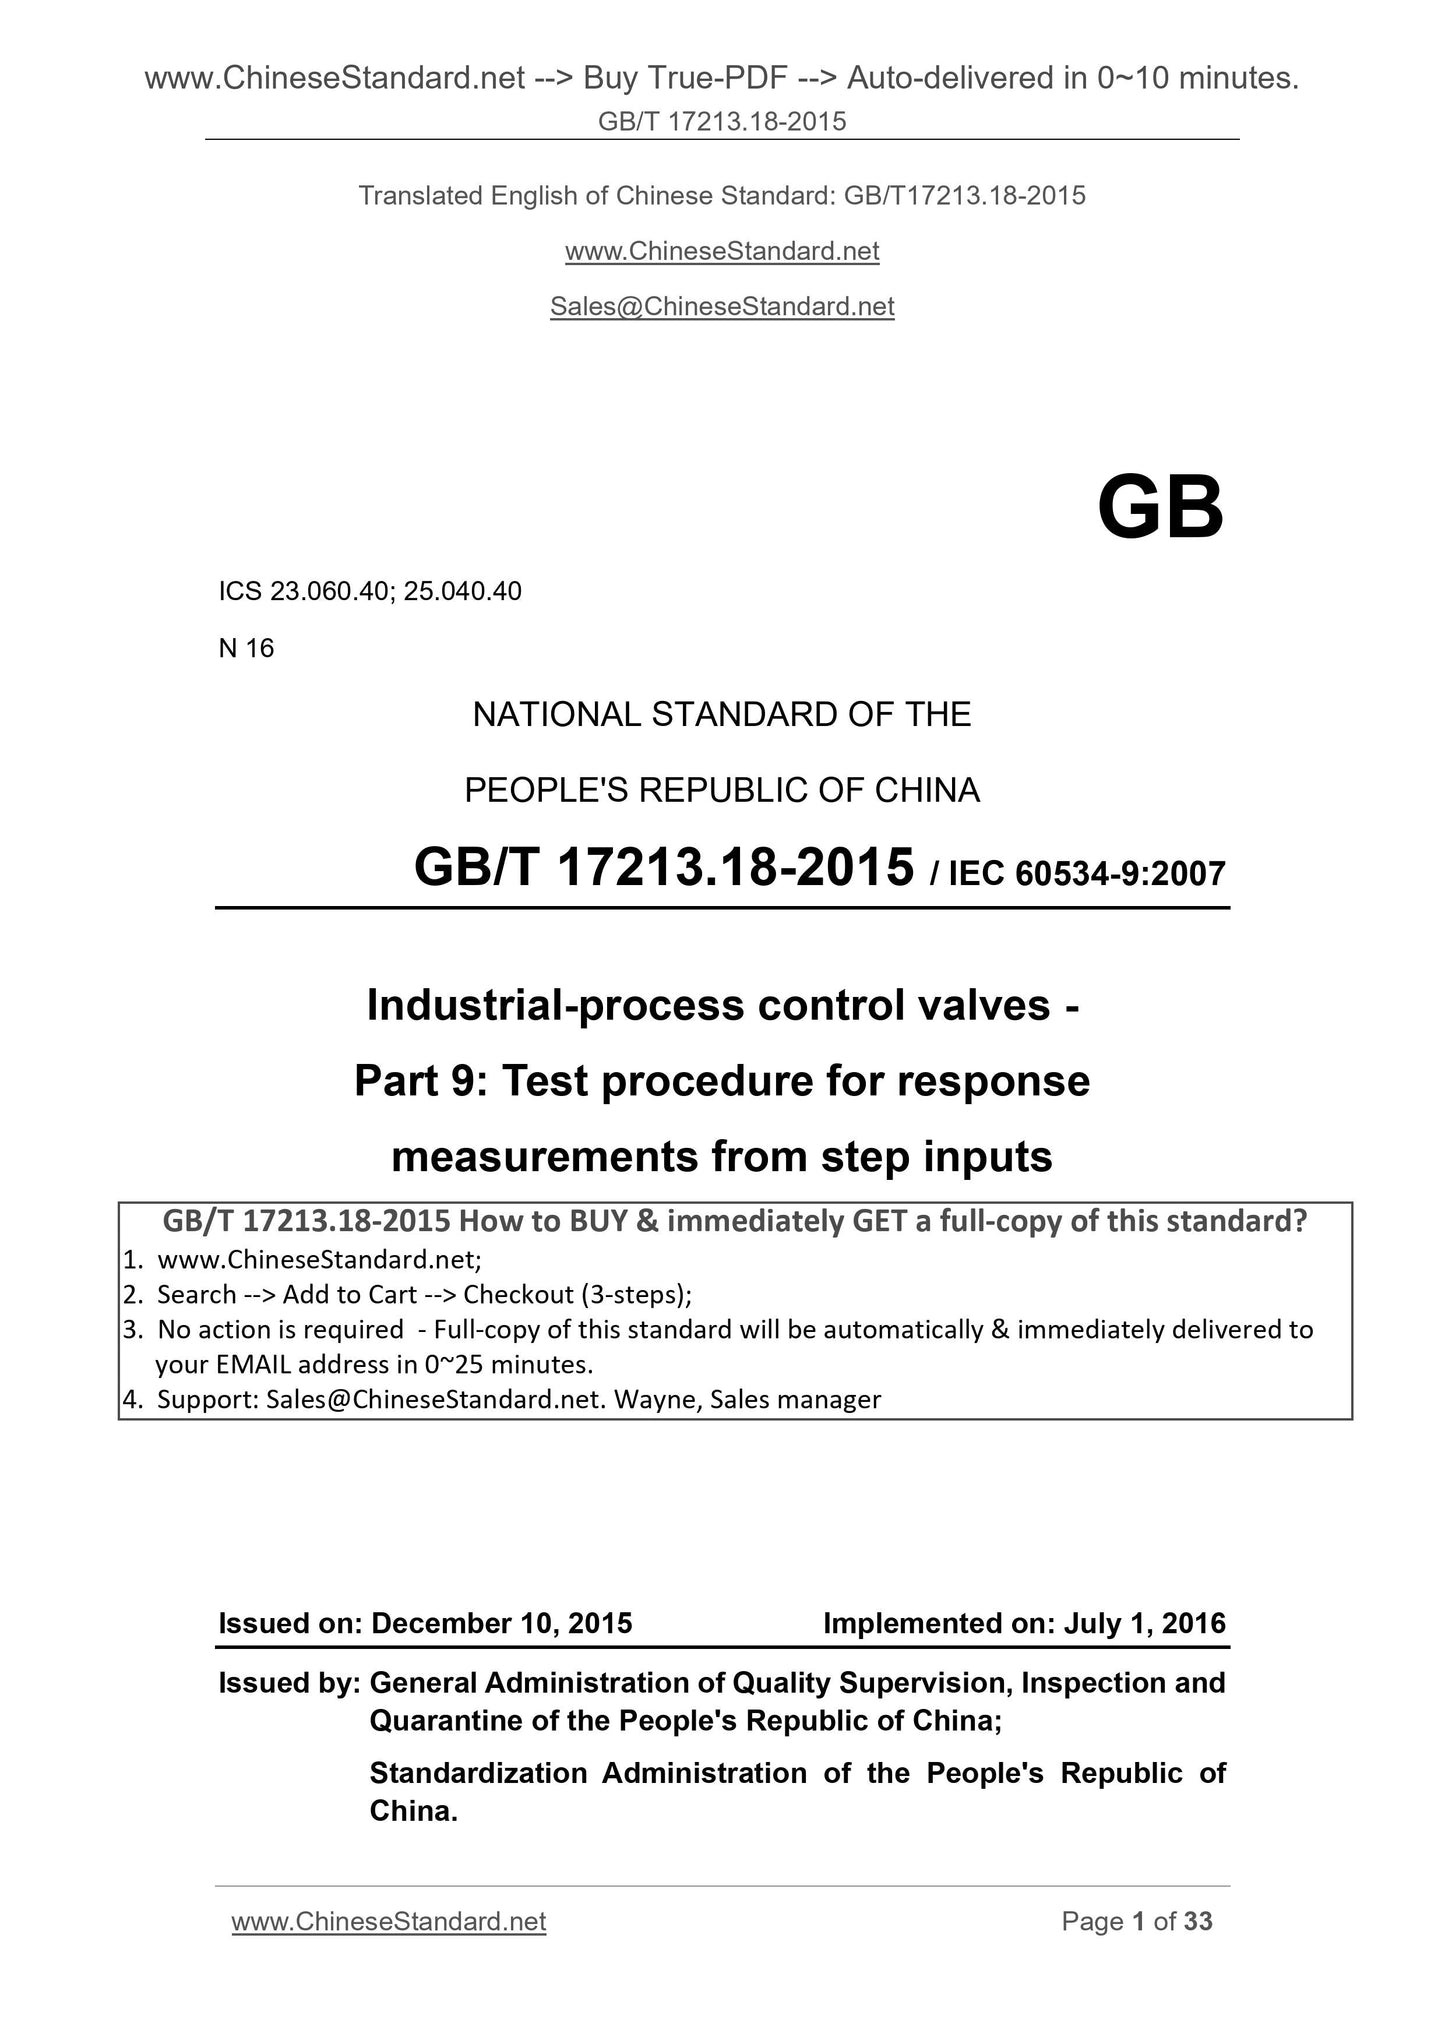 GB/T 17213.18-2015 Page 1